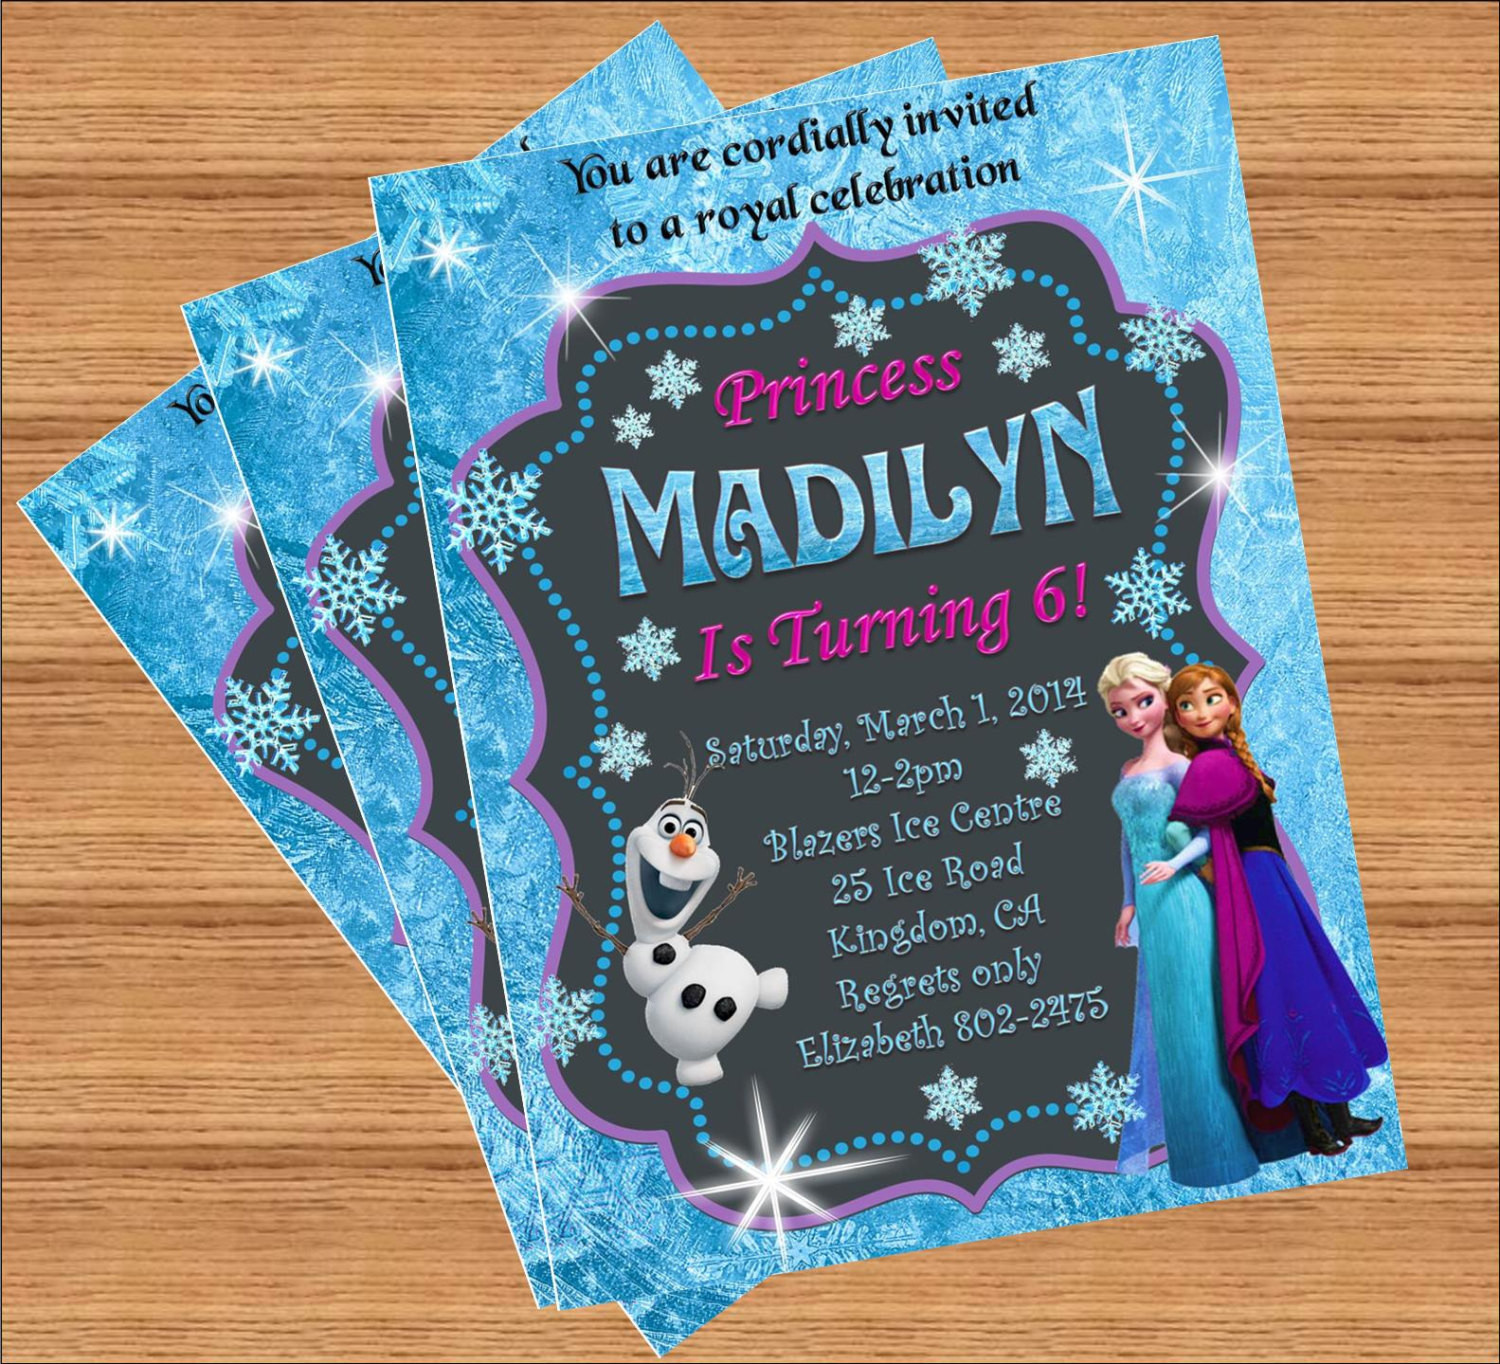 Personalized Birthday Party Invitations
 Frozen Birthday Invitation Custom Invitation